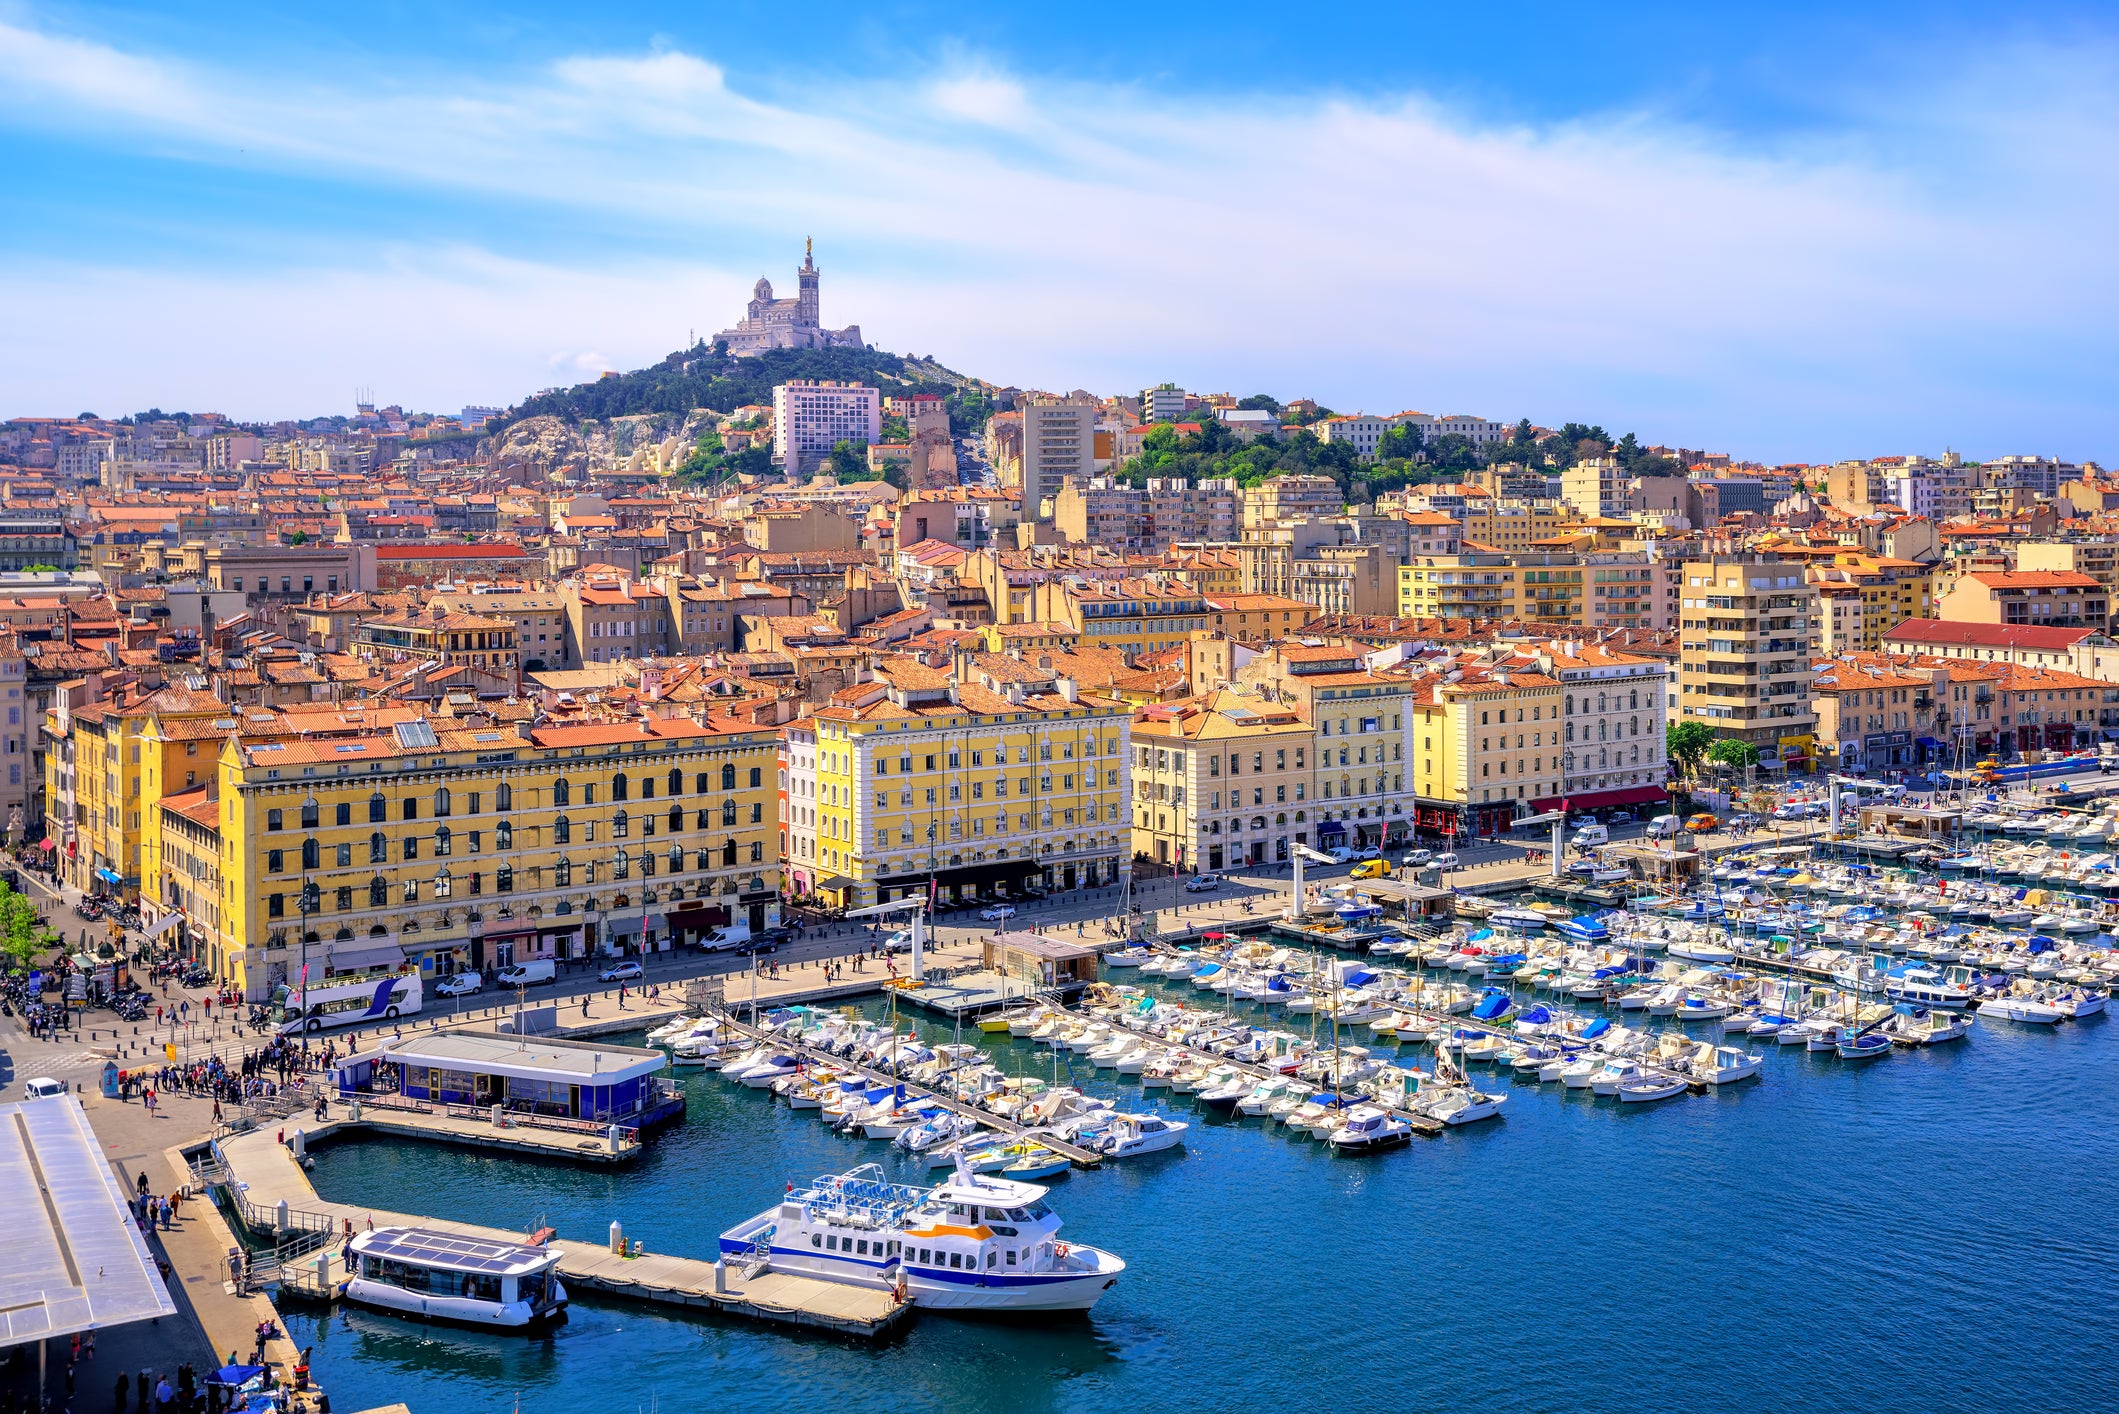 The oldest French city, Marseille, is a cosmopolitan window to the Mediterranean